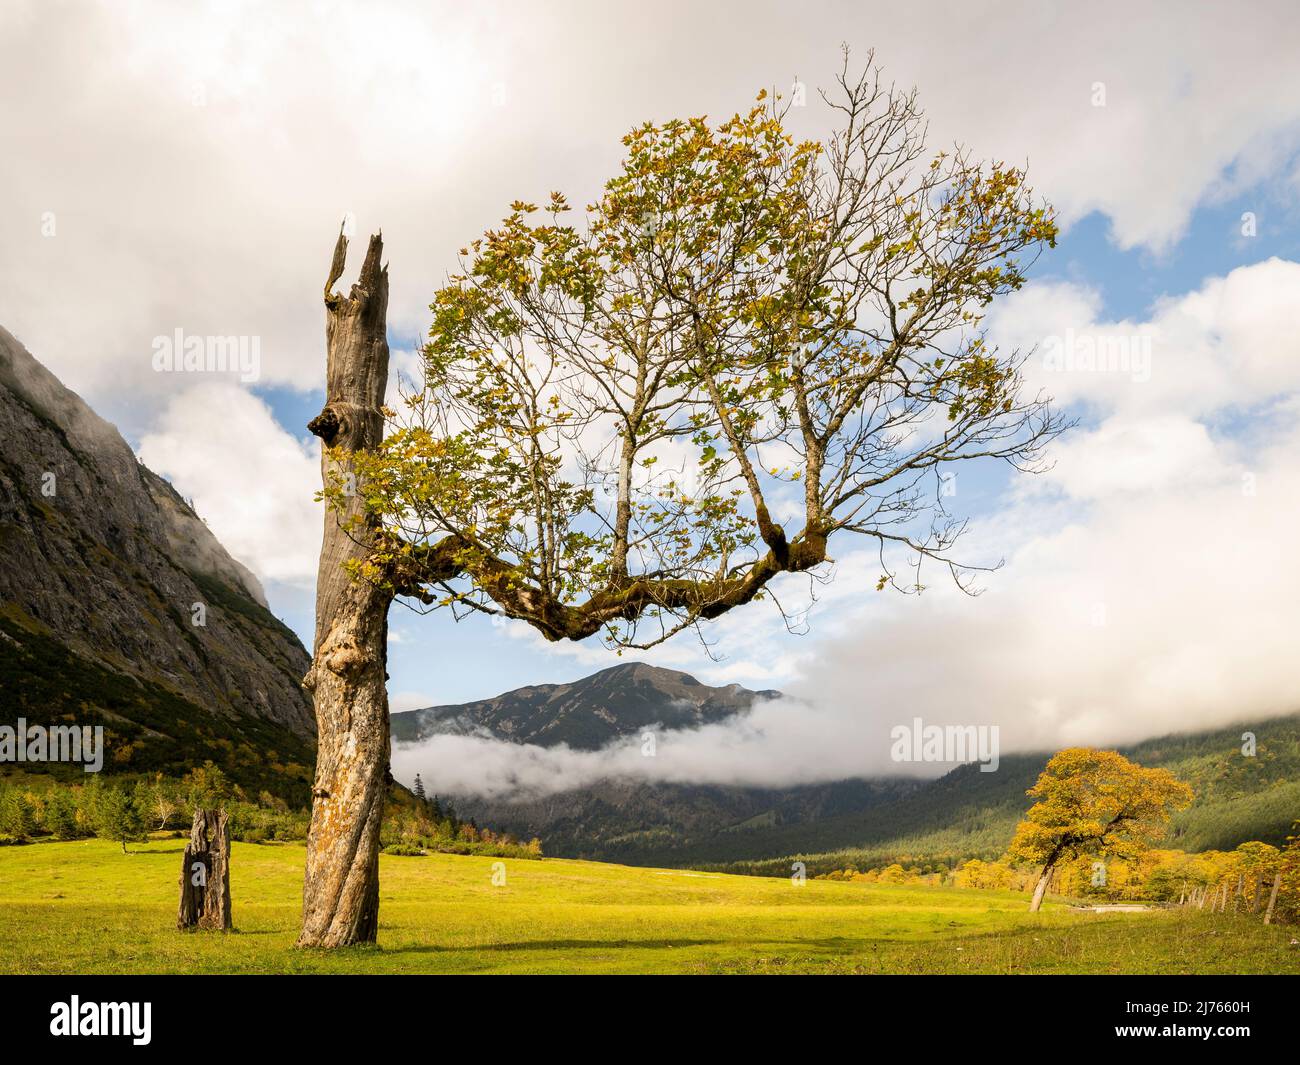 An old maple tree with a single leafy branch on the large maple ground in Karwendel, Tyrol / Austria in the afternoon sun in autumn with clouds and mountains in the background. Stock Photo